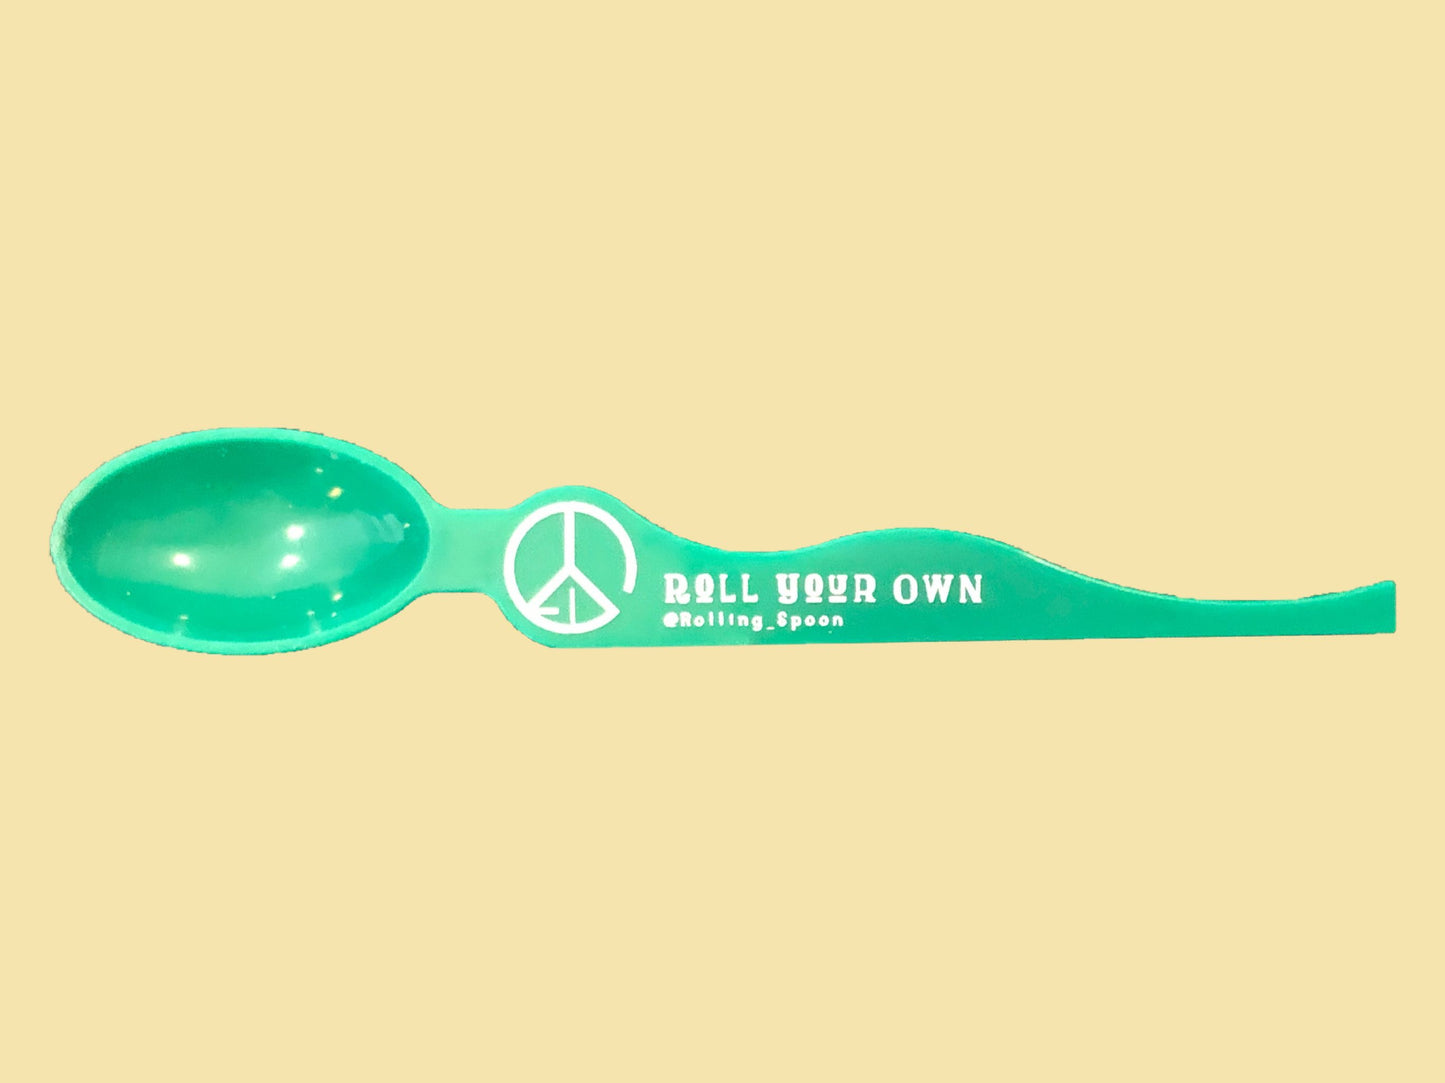 The Rolling Spoon